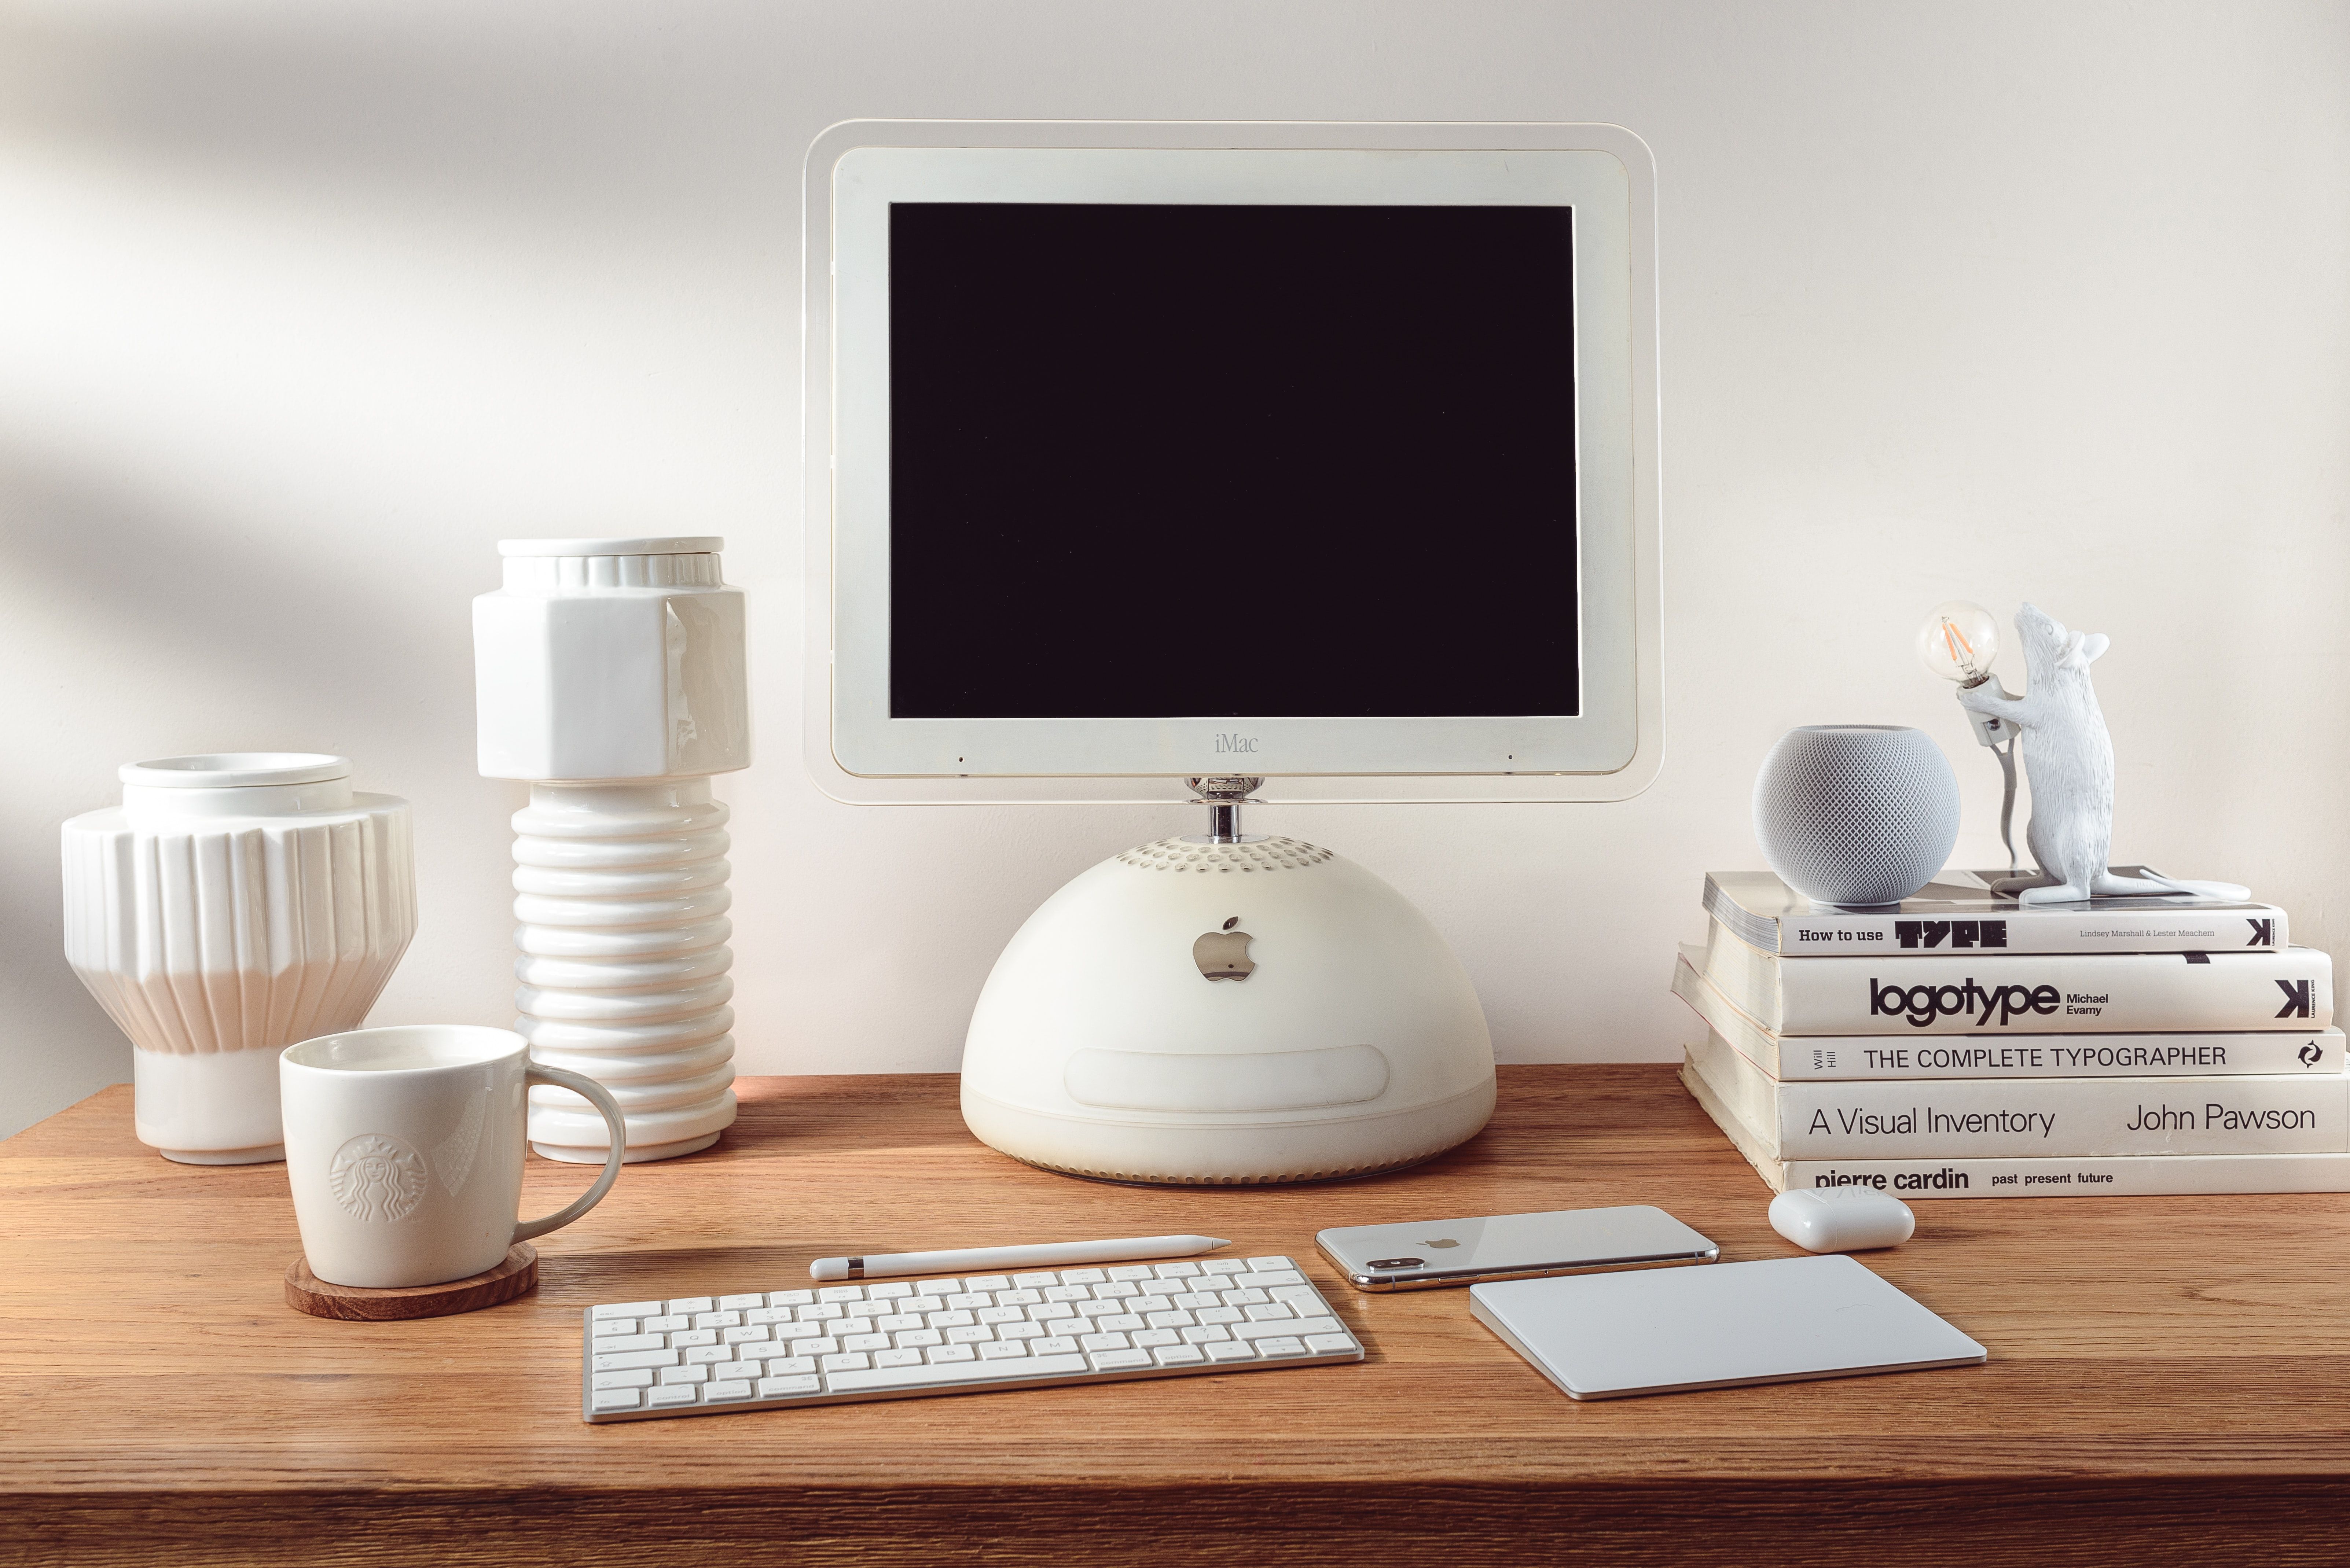 A collection of apple product sincluding a Mac and a HomePod Mini on a desk